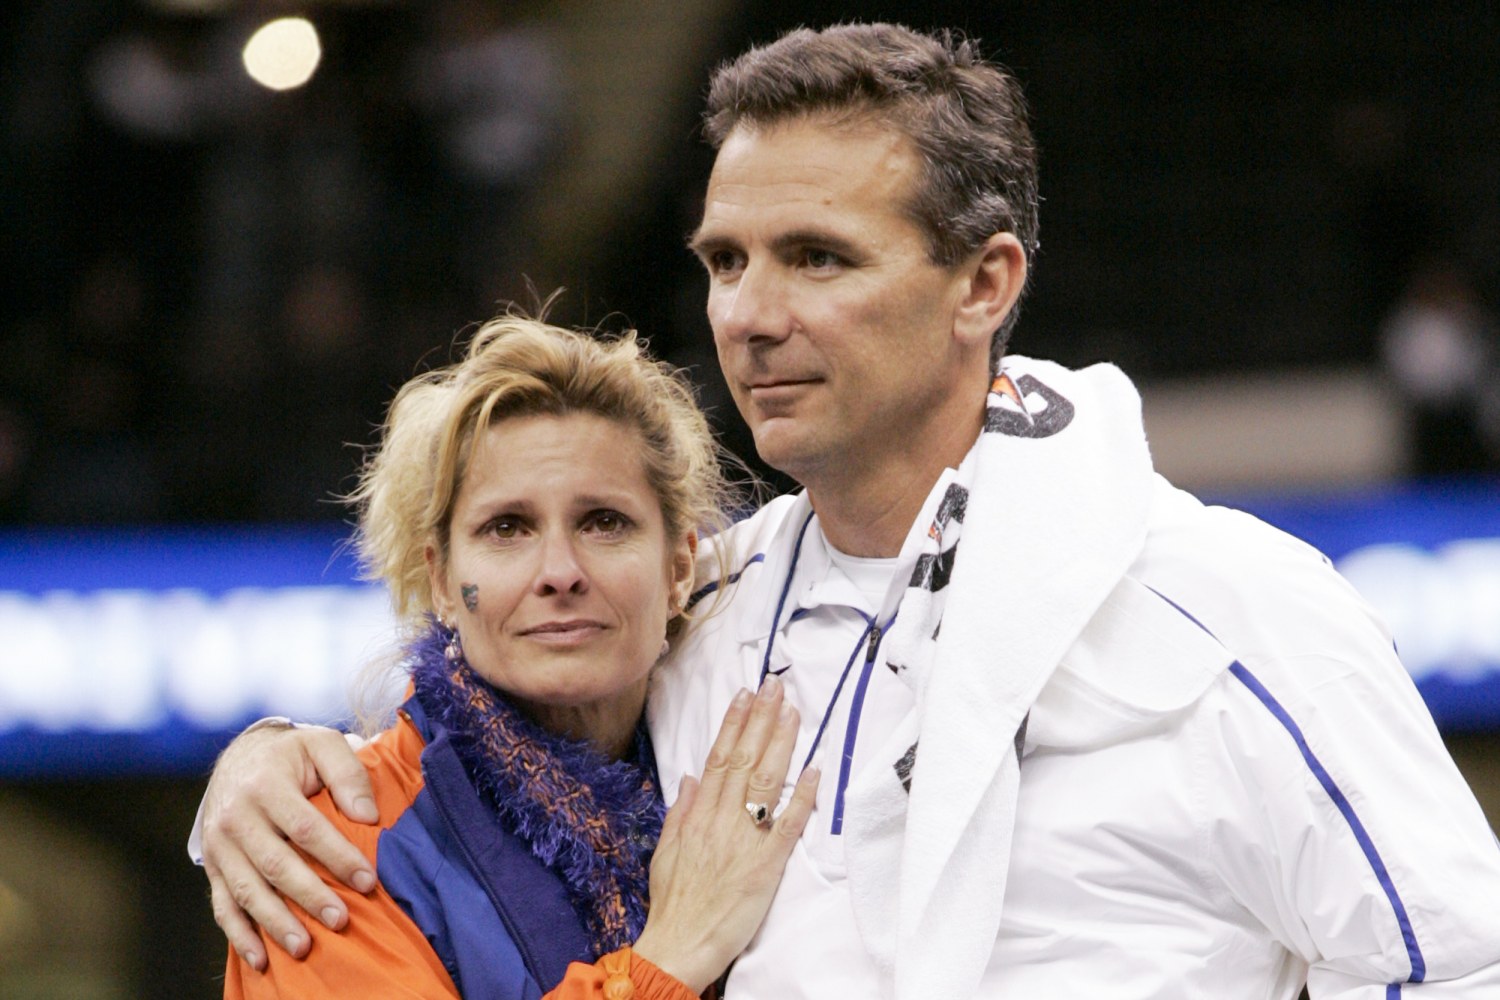 We are all sinners Urban Meyers wife addresses video of NFL coach at Ohio